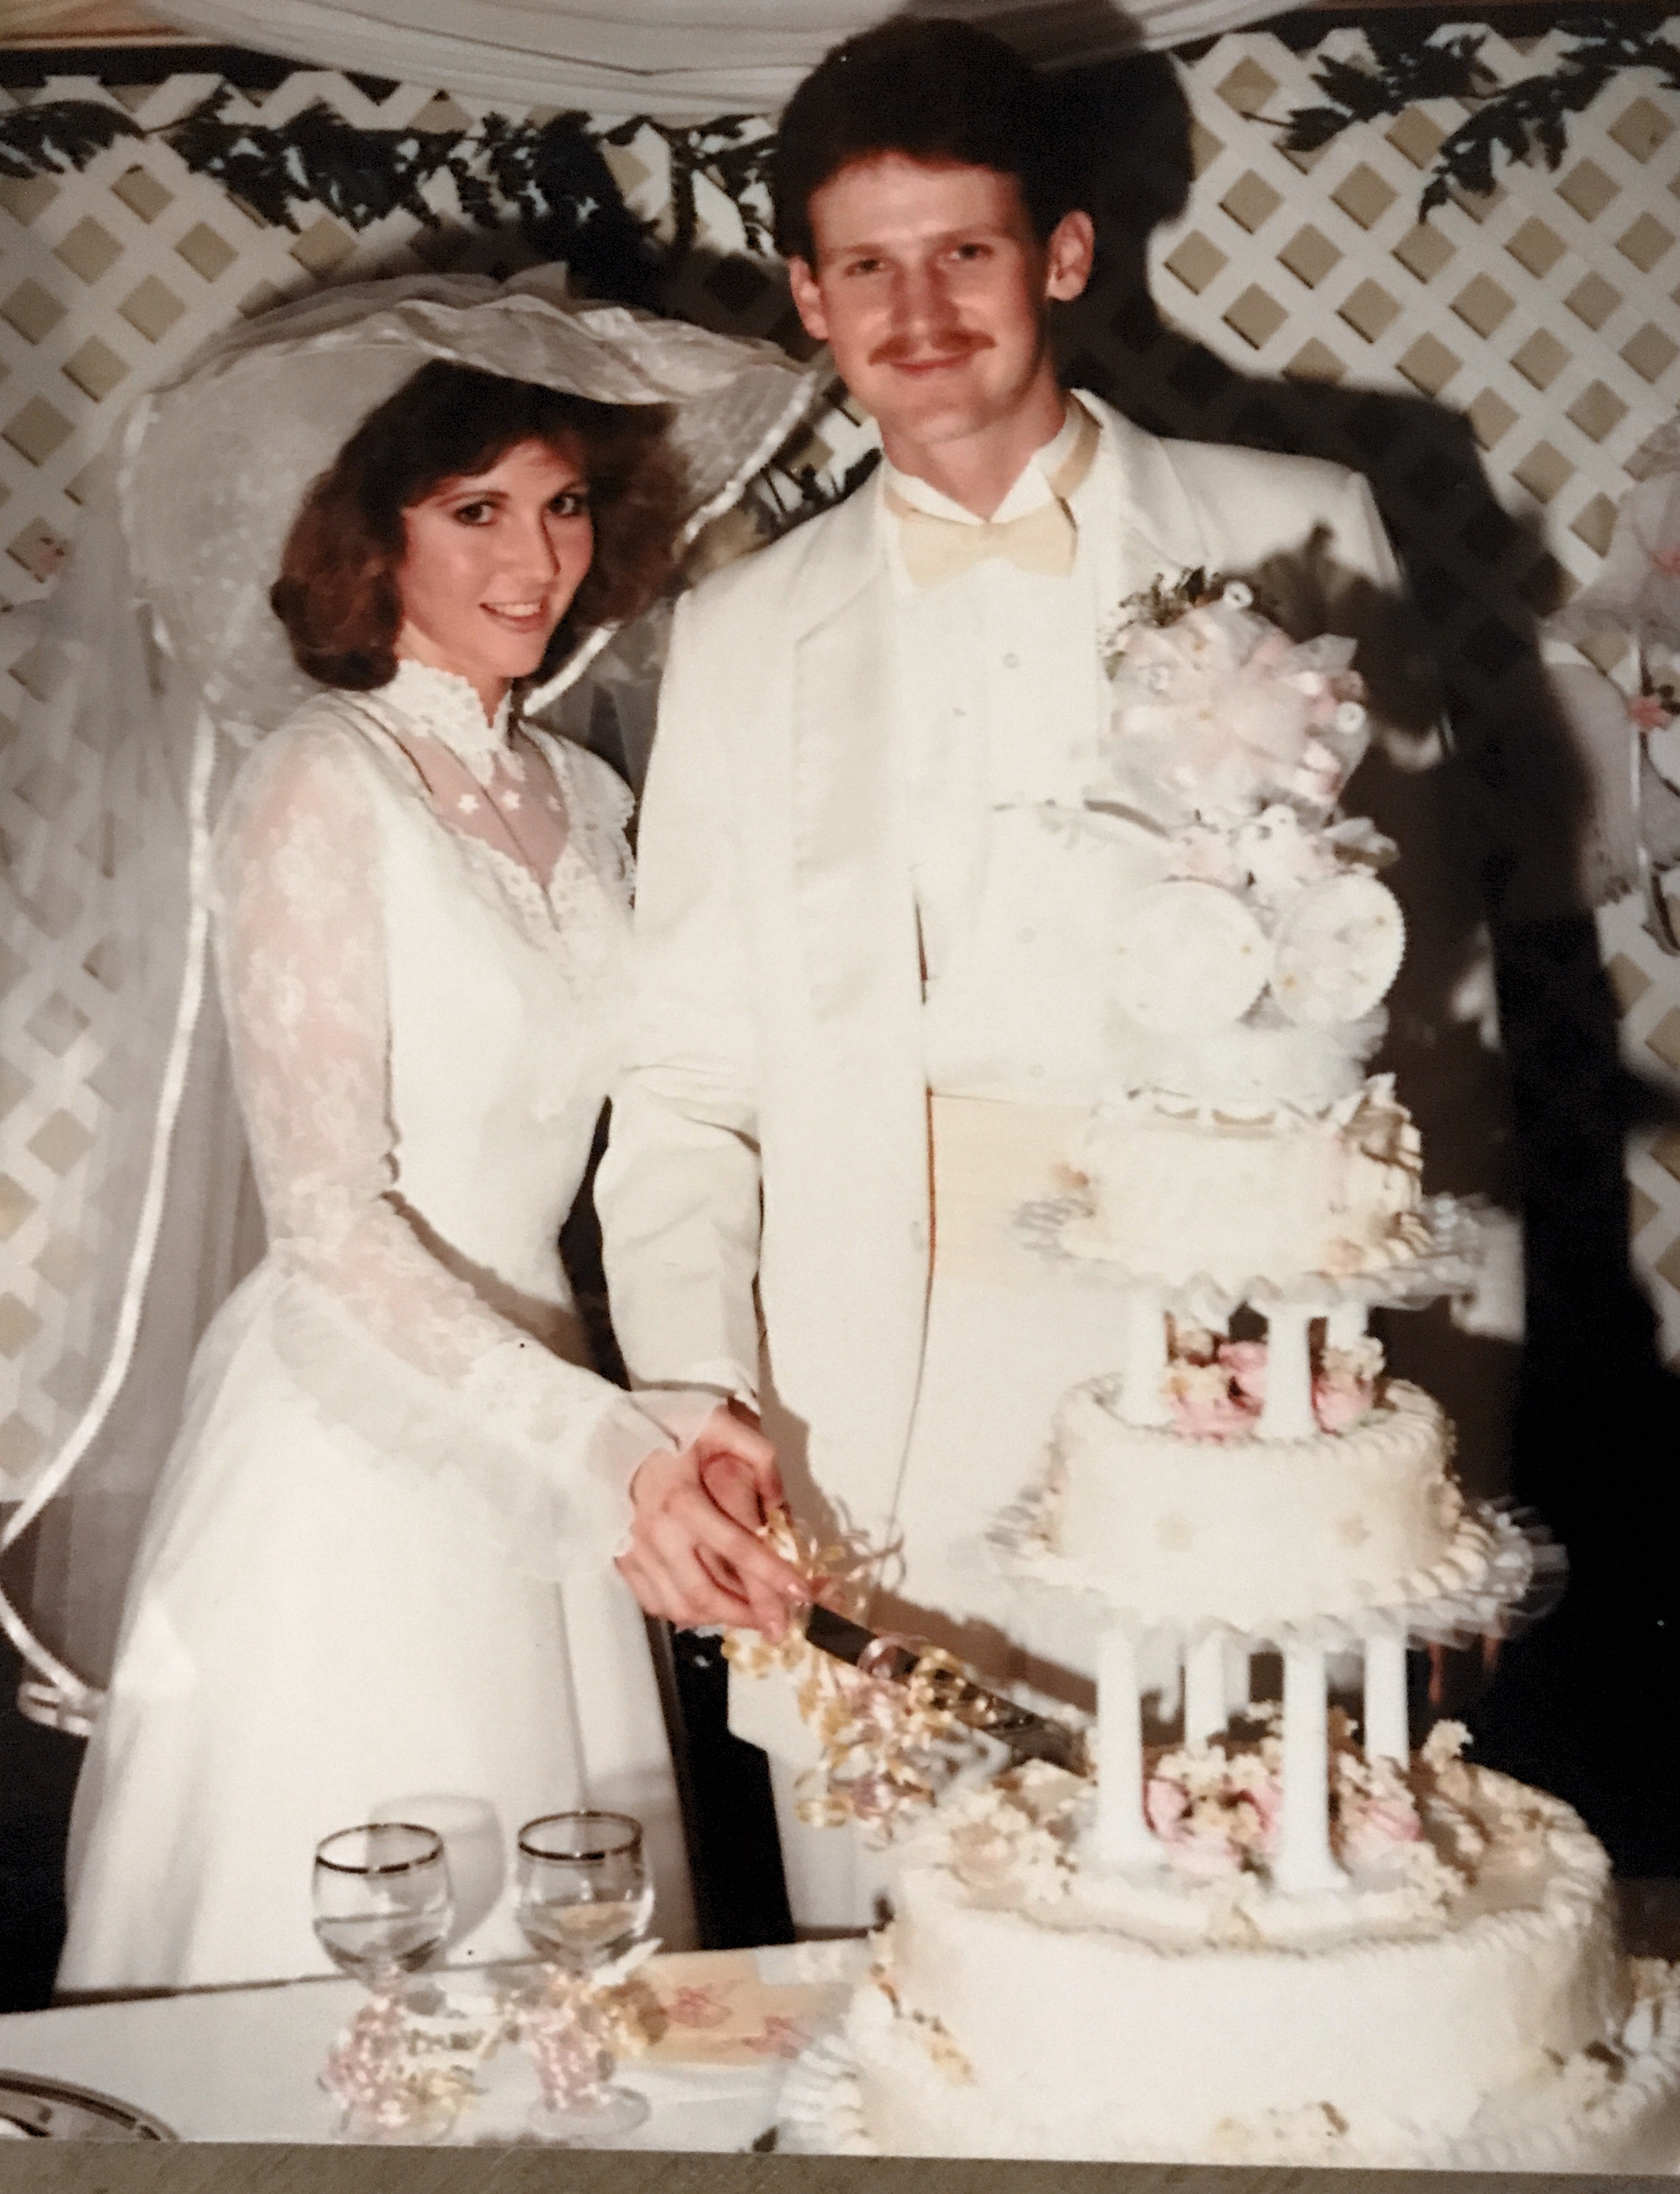 Our Wedding Day, August 31, 1985